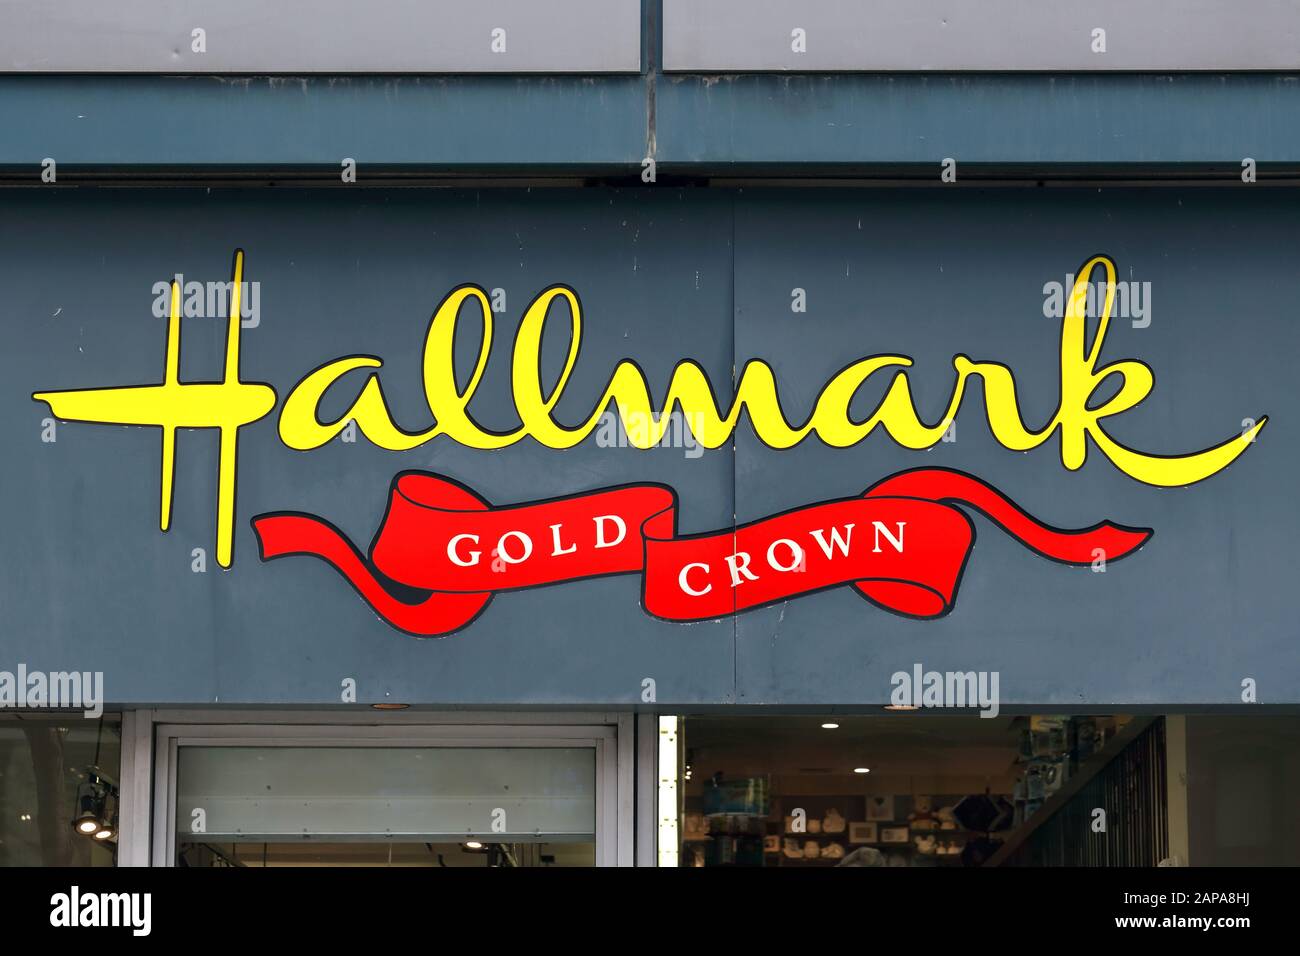 A Hallmark Gold Crown logo on a stationary store in Manhattan, New York, NY Stock Photo